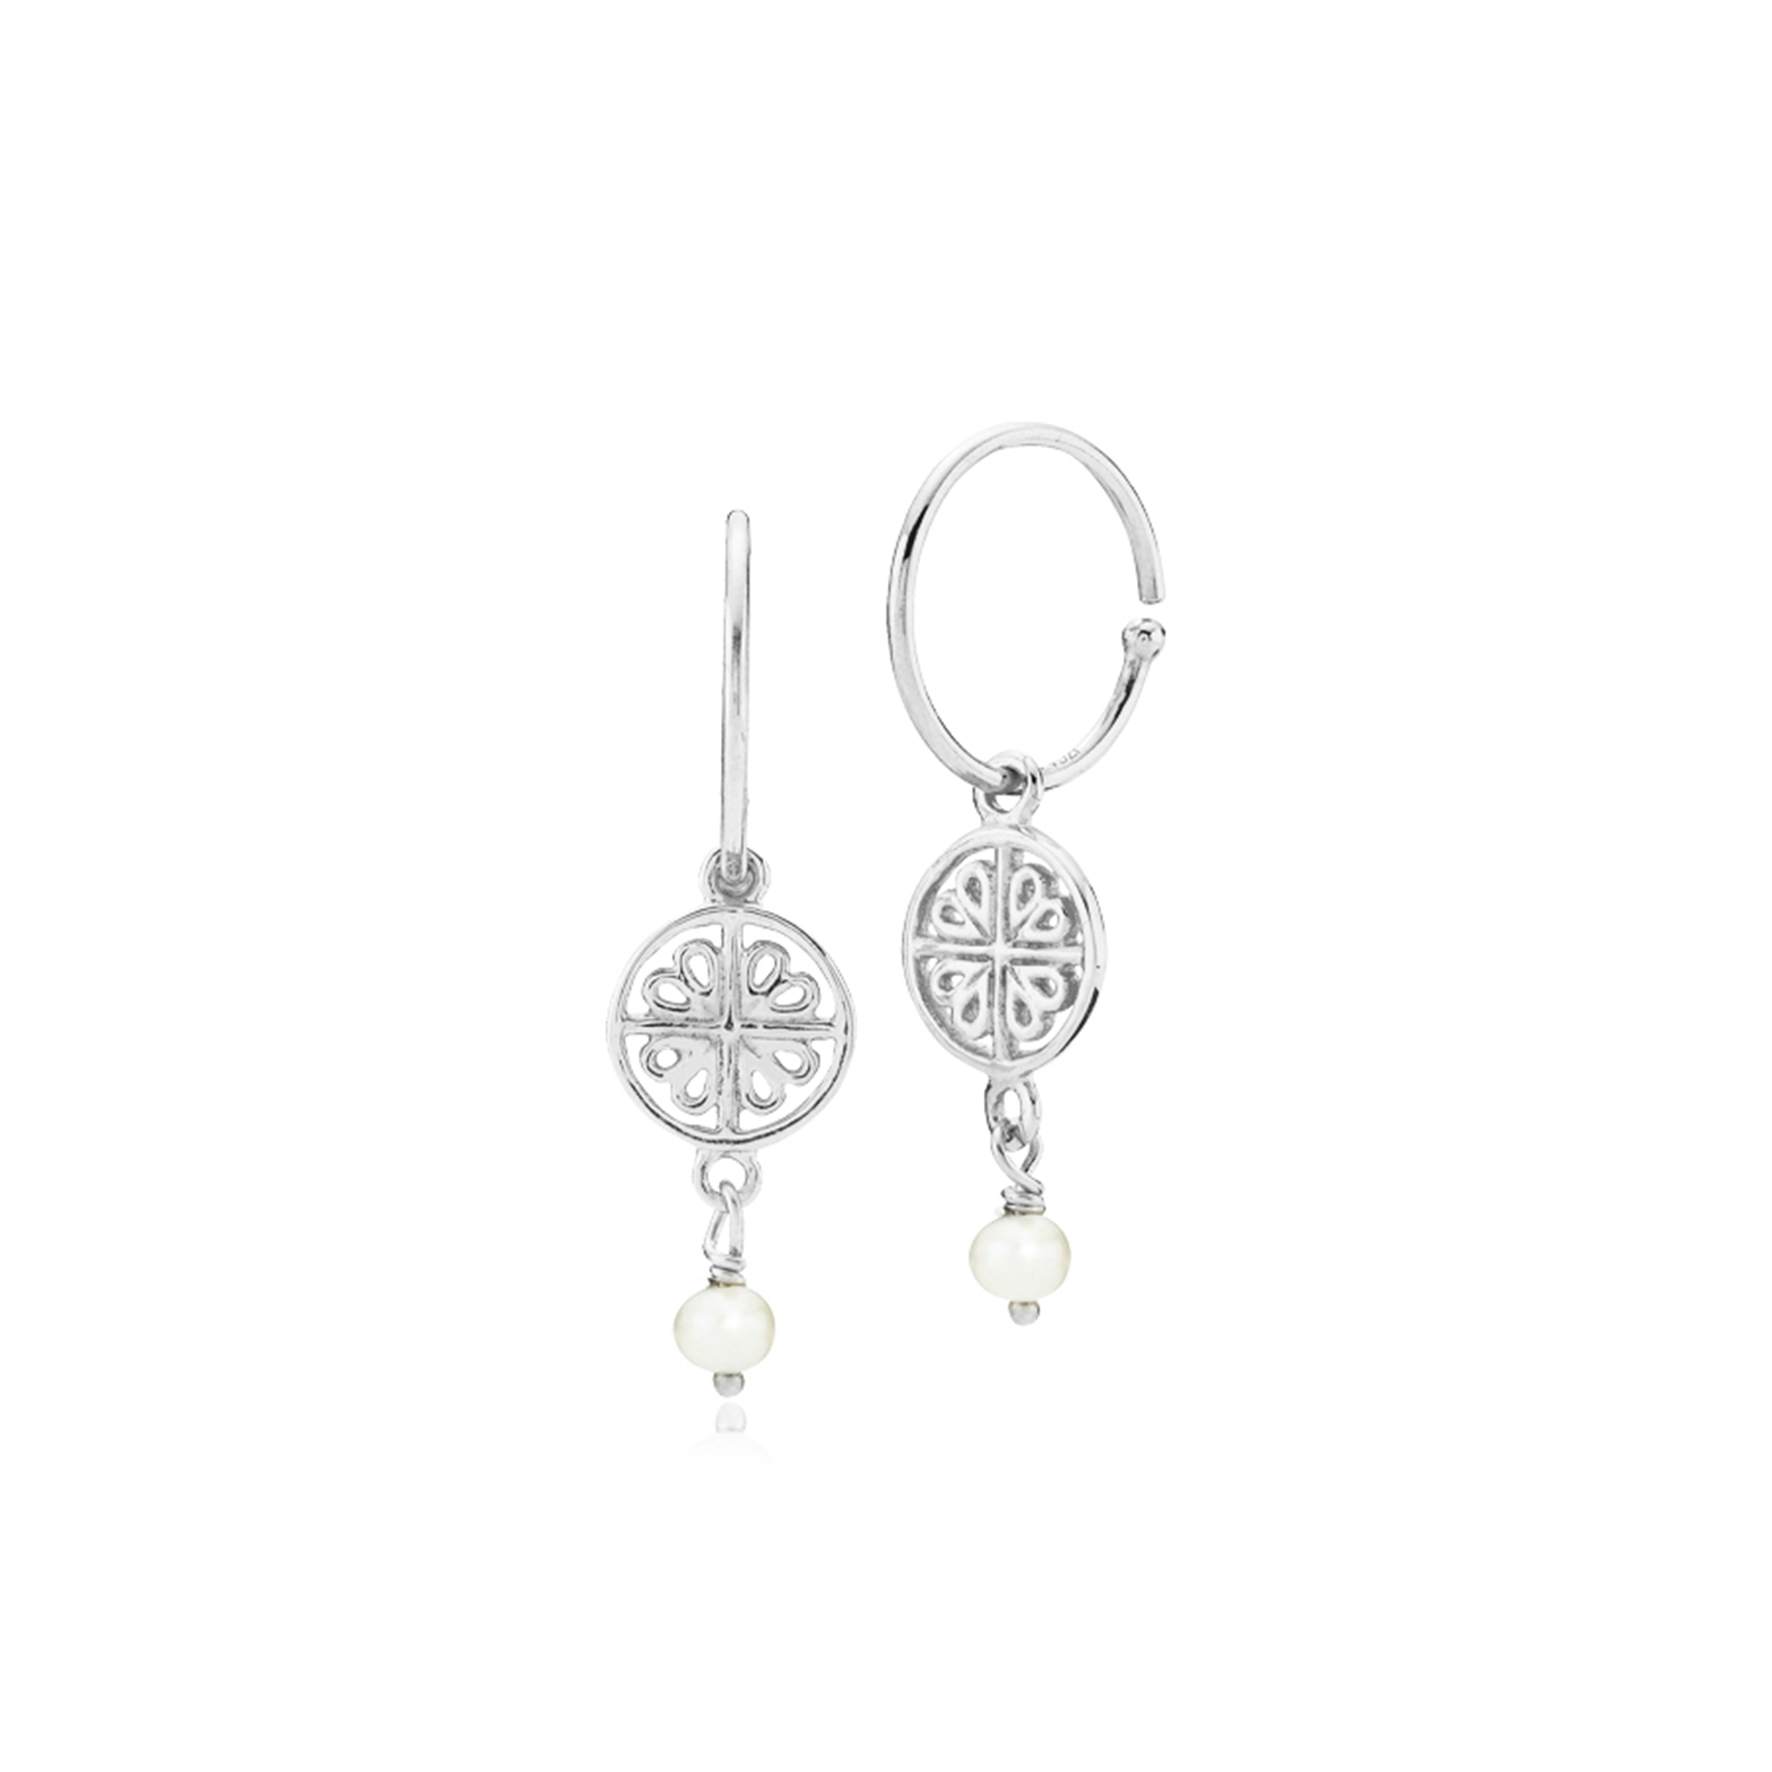 Balance Creol Earrings With Pearl från Sistie i Silver Sterling 925